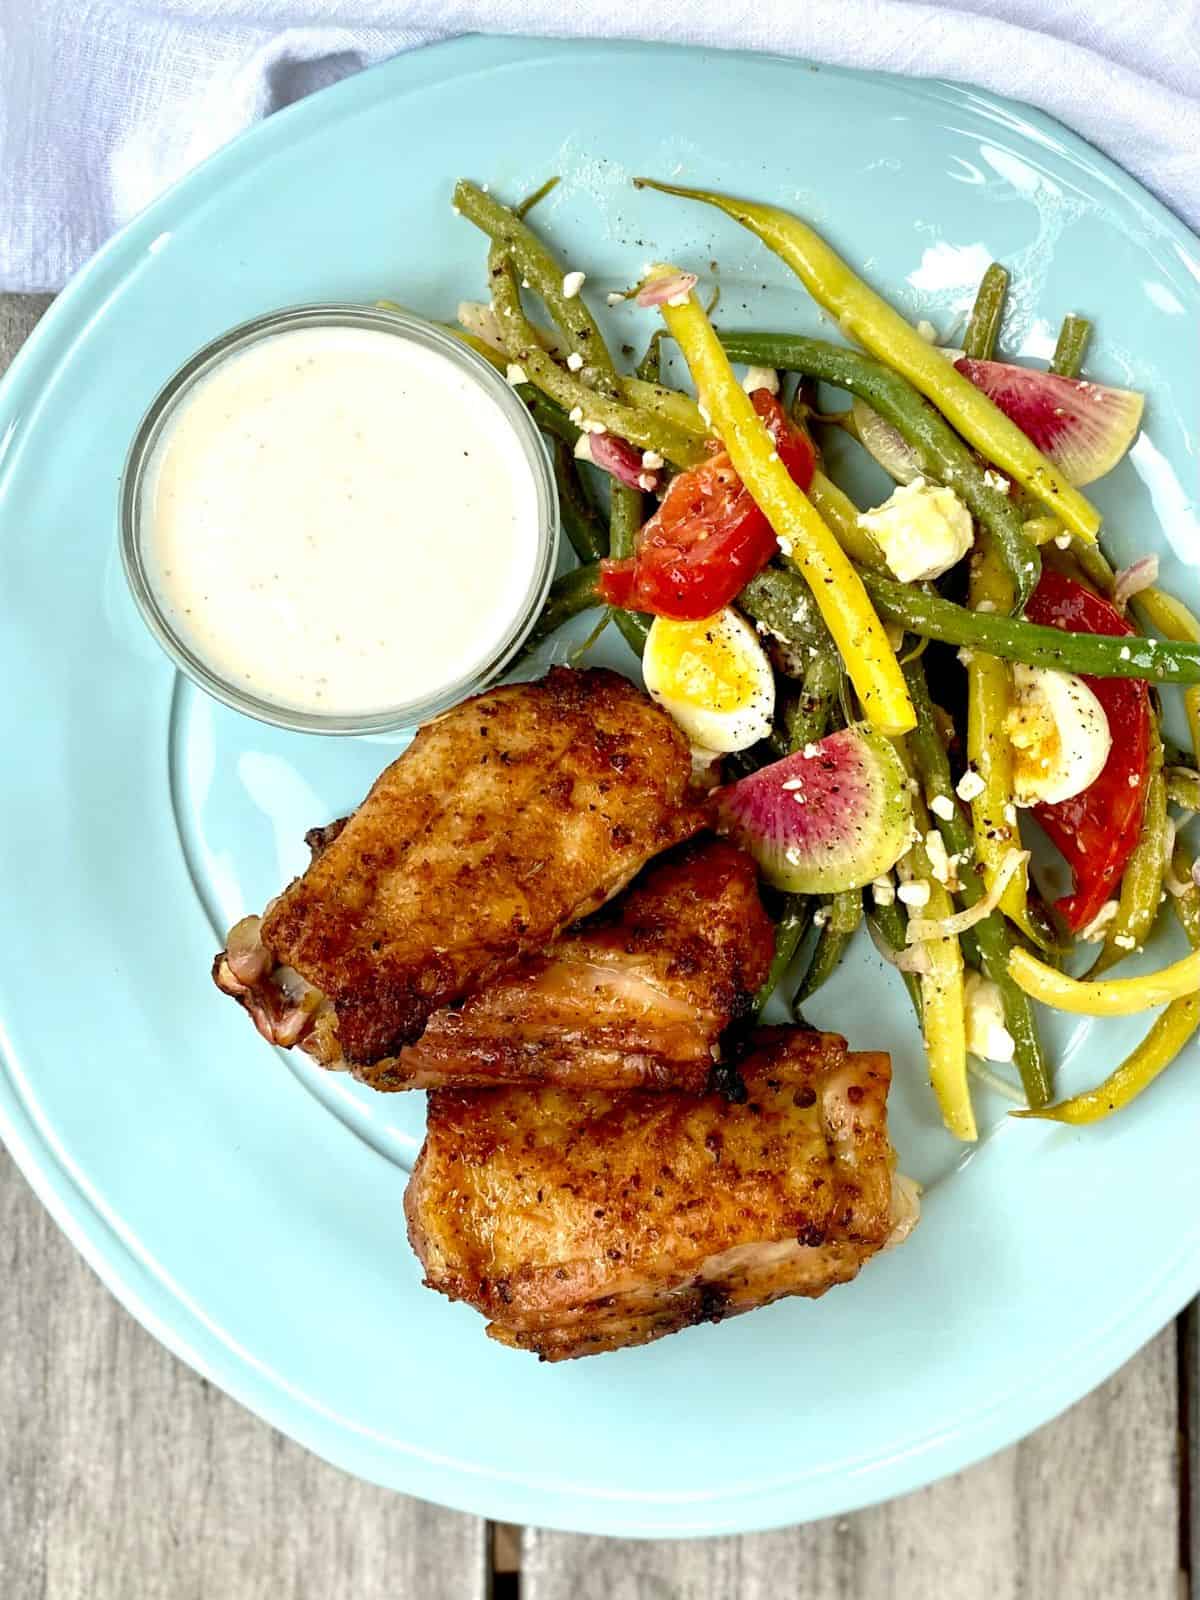 citrus rubbed chicken wings with feta cream and garden bean salad on blue plate